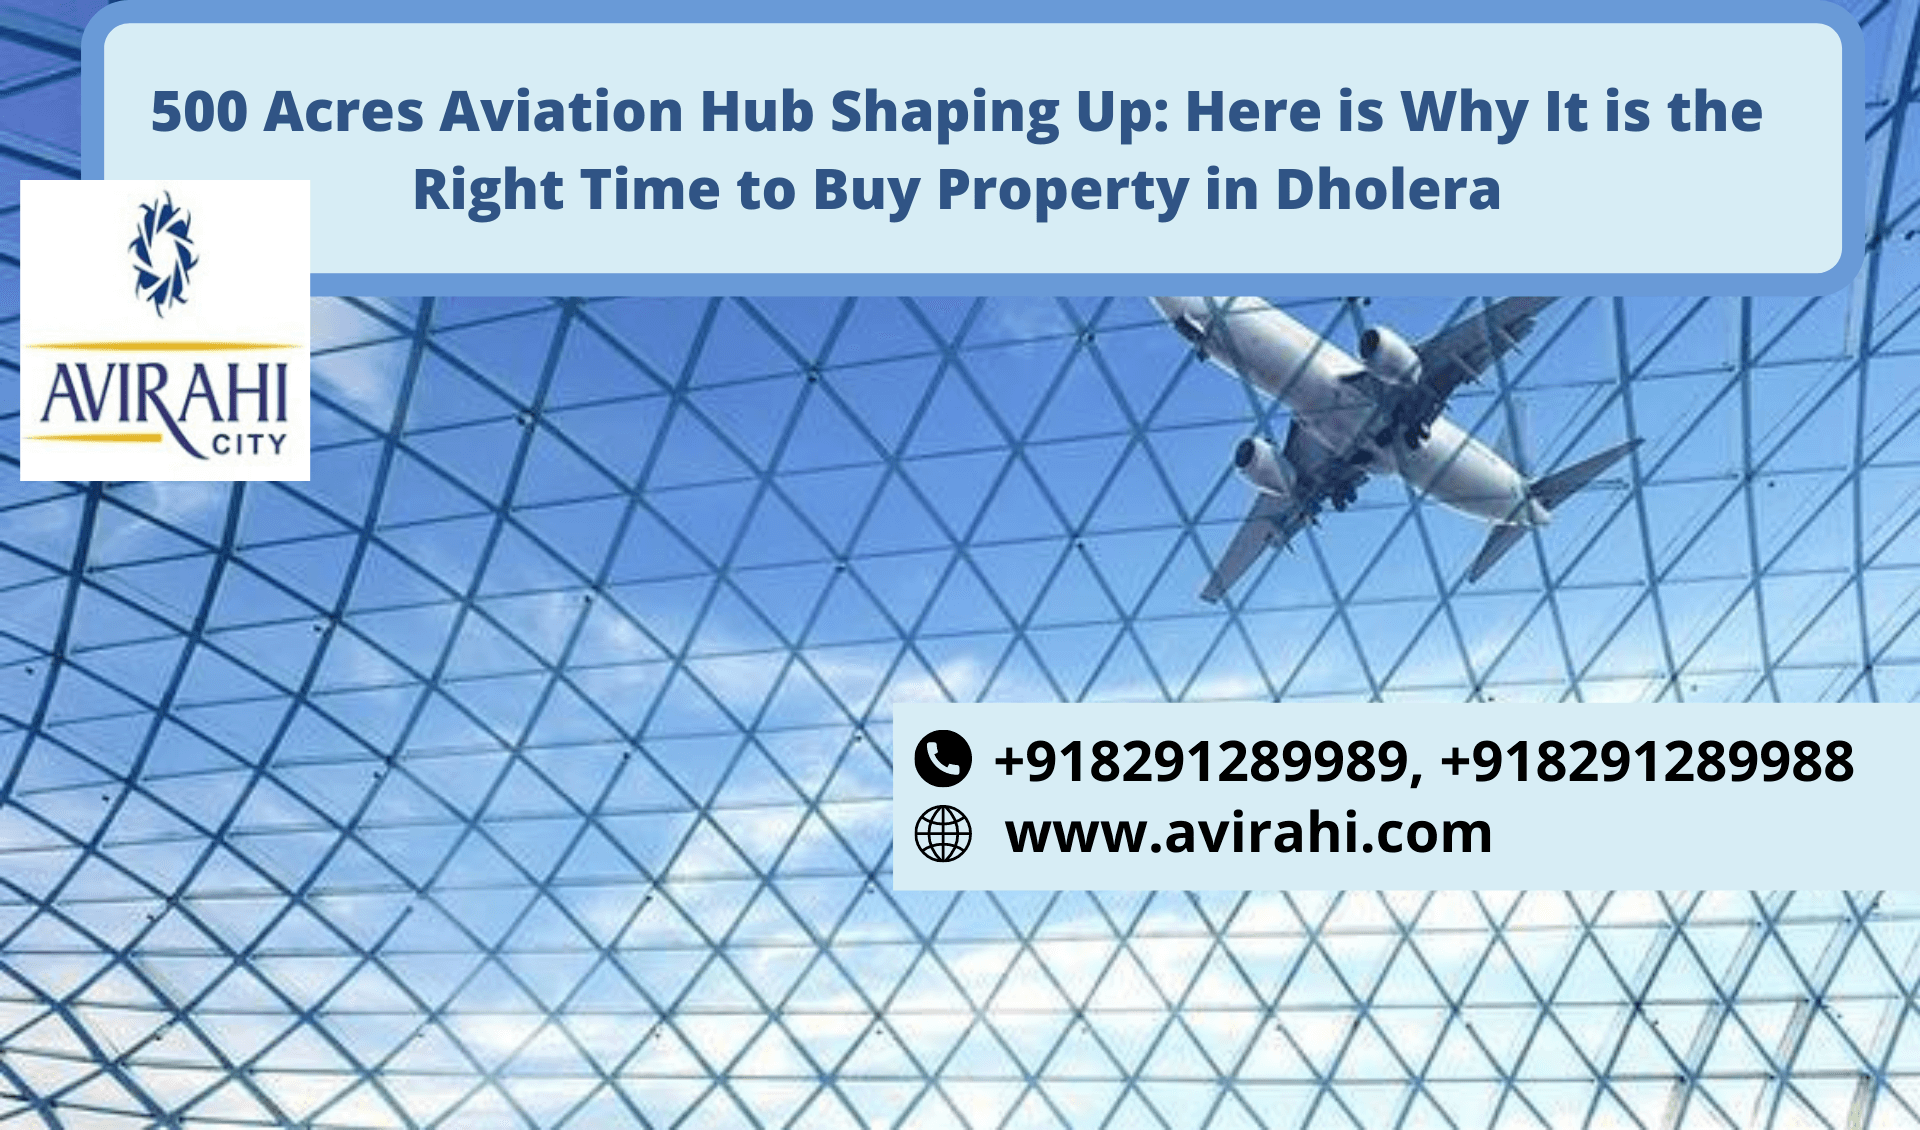 500 Acres Aviation Hub Shaping Up_ Here is Why It Is the Right Time to Buy Property in Dholera (2)